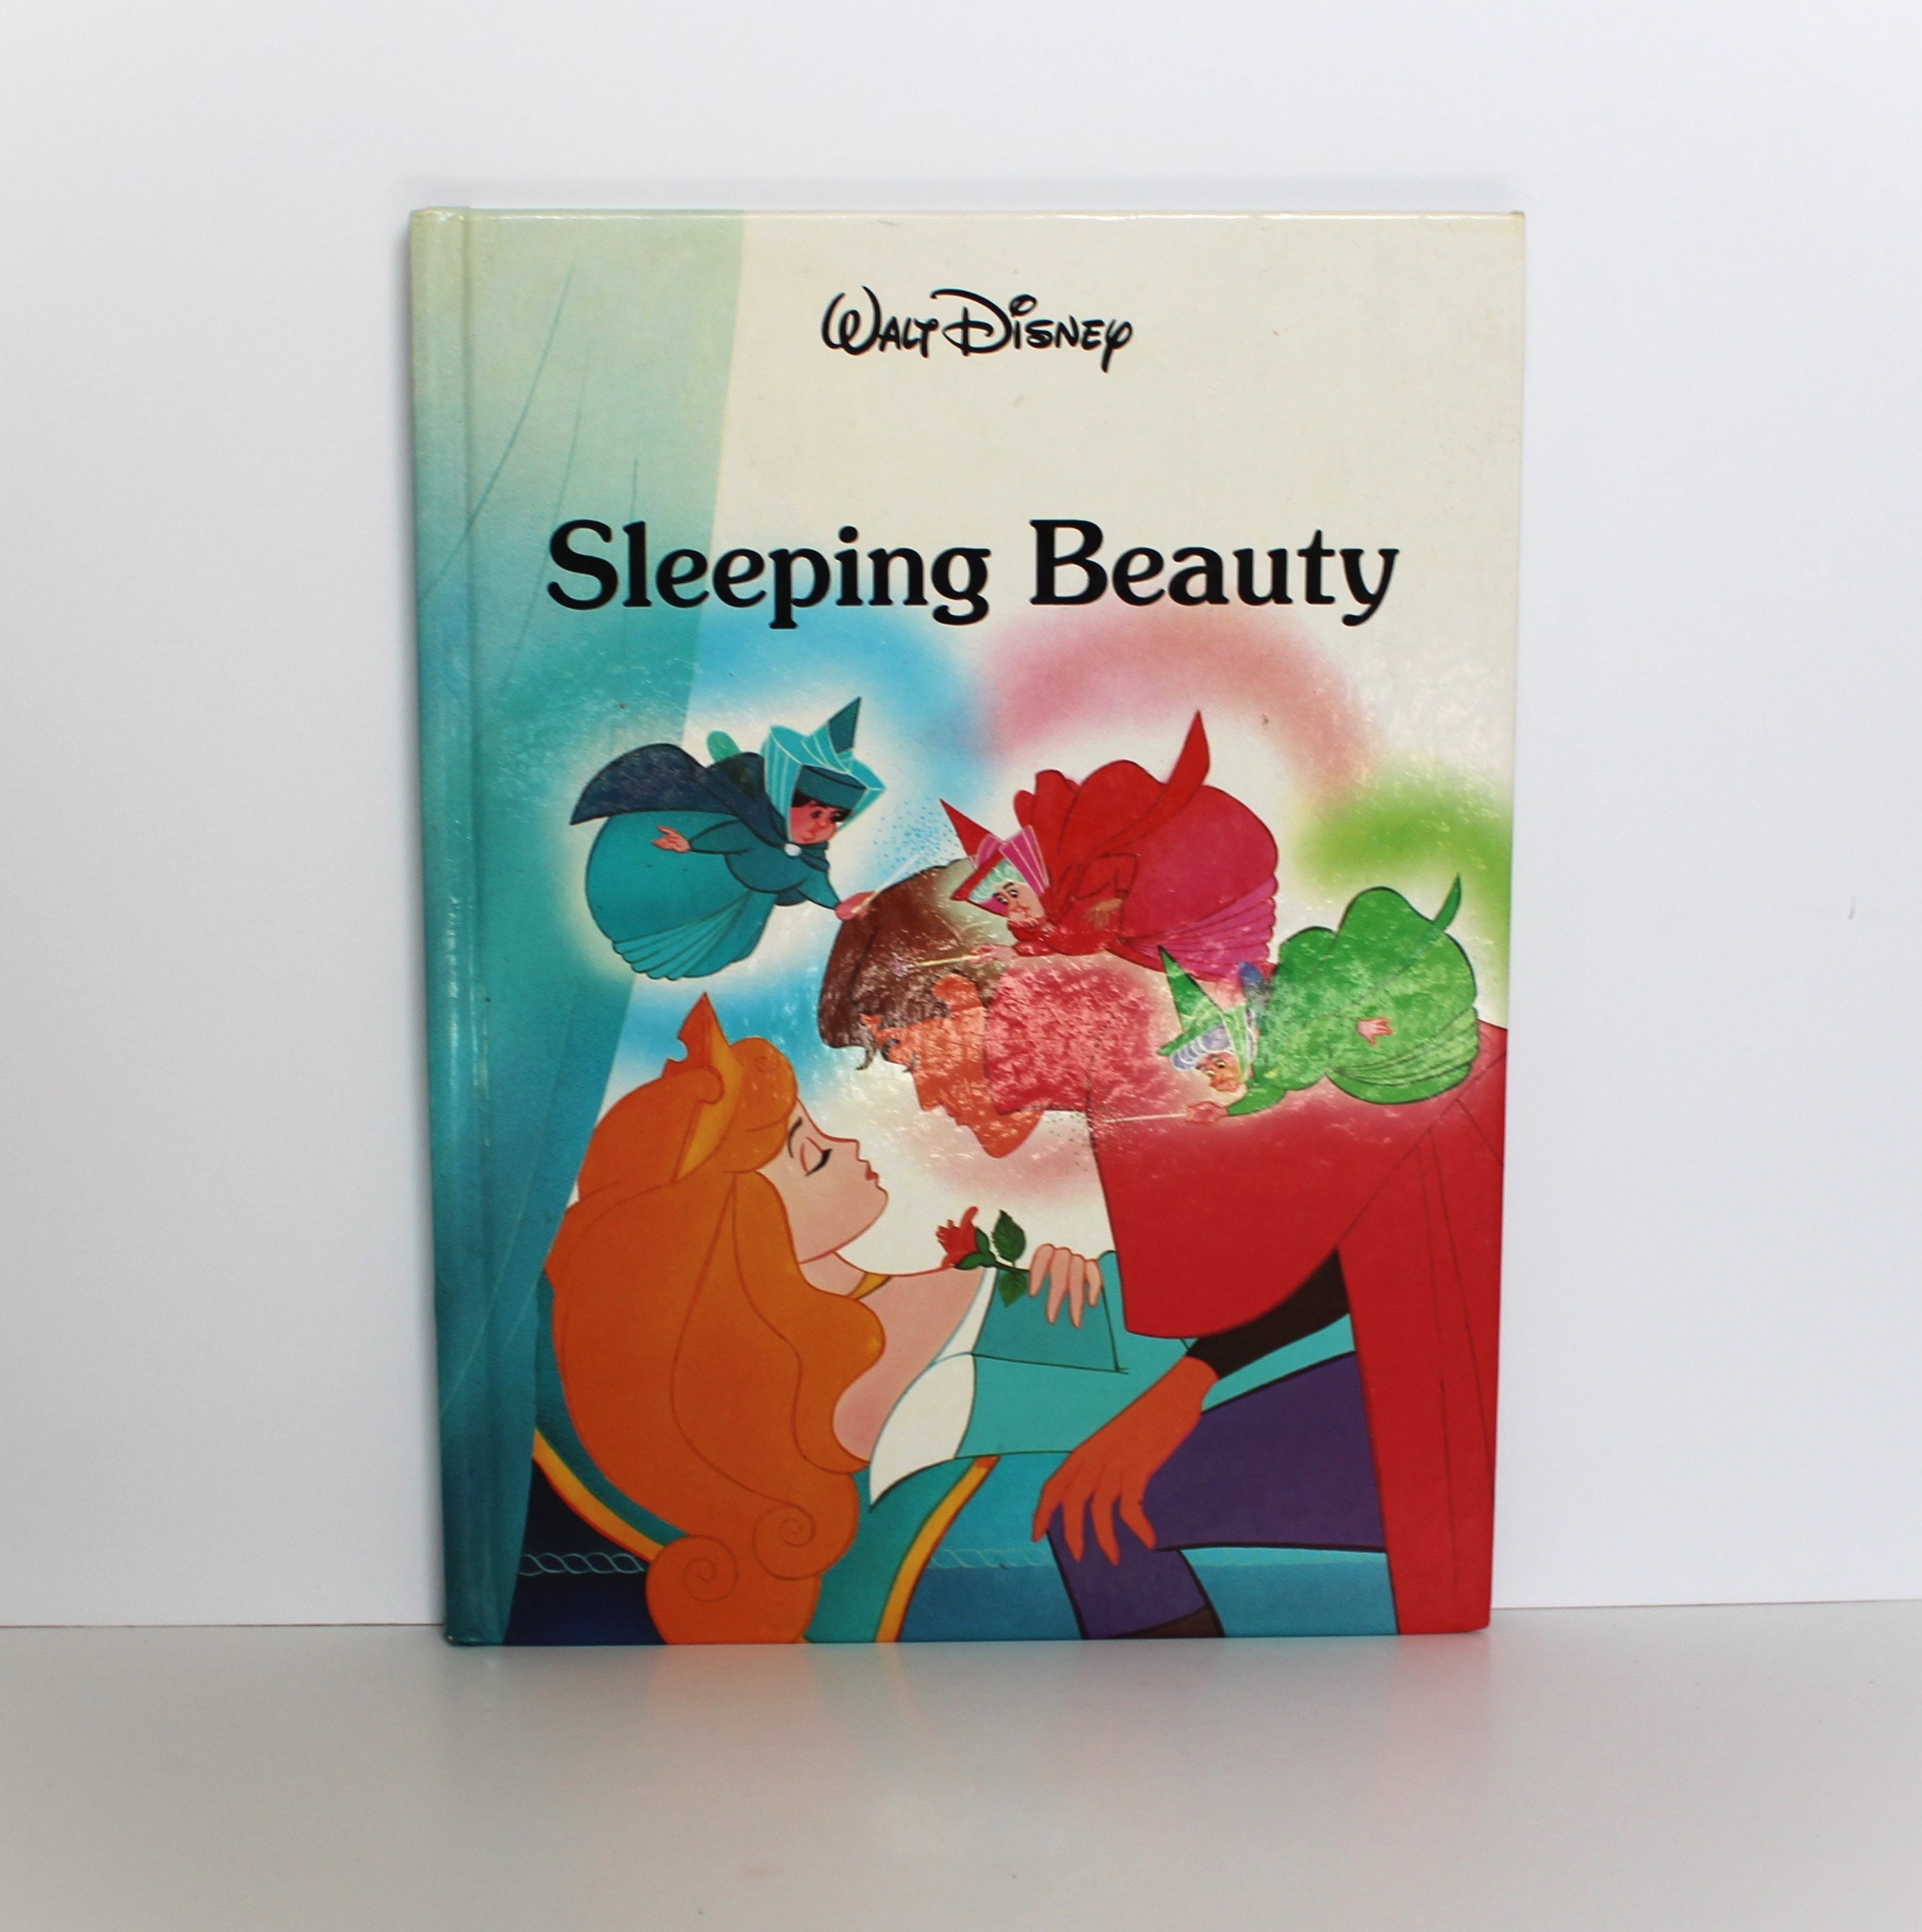 Personalised Disney Autograph Book FOR SALE! - PicClick UK